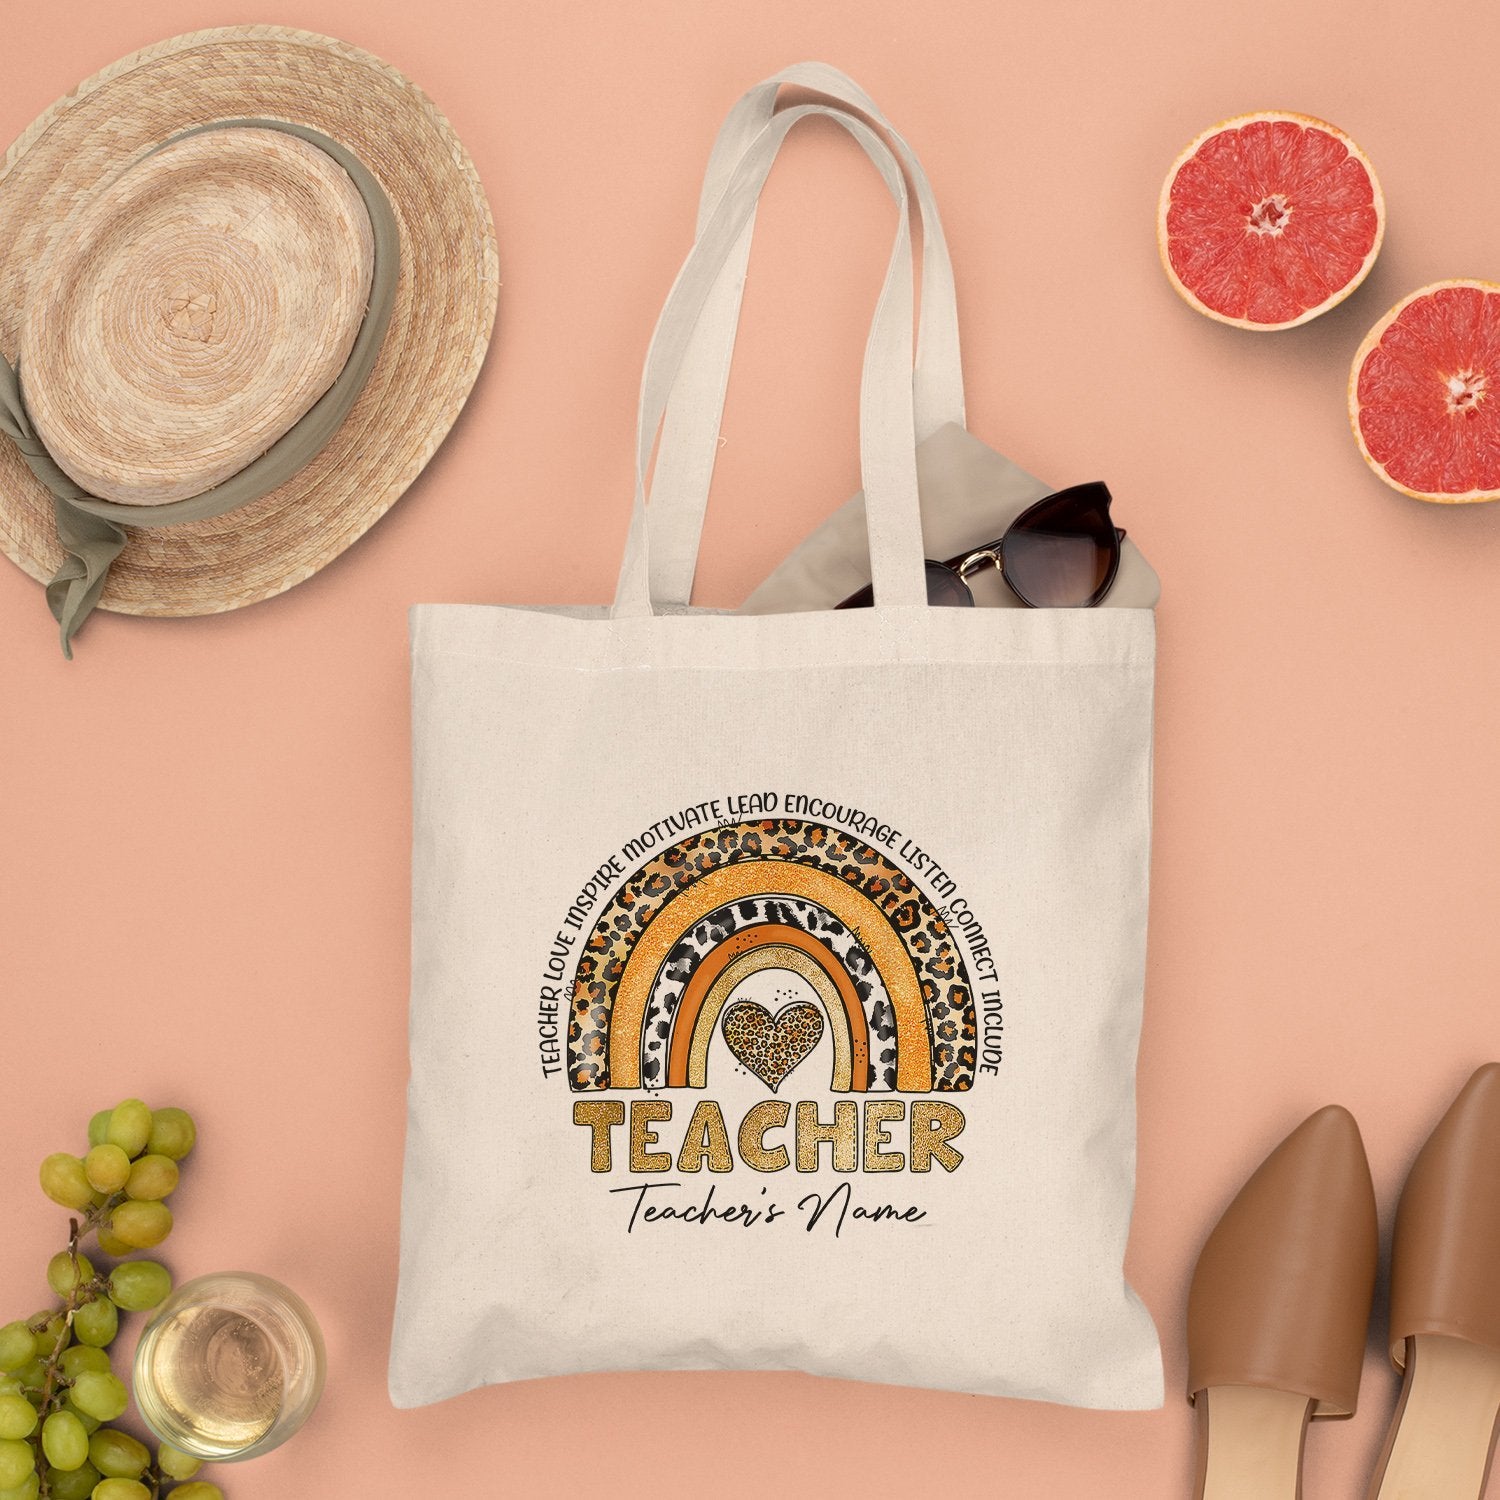 Personalized Tote Bags With Name Hand Painted Aesthetic Design 